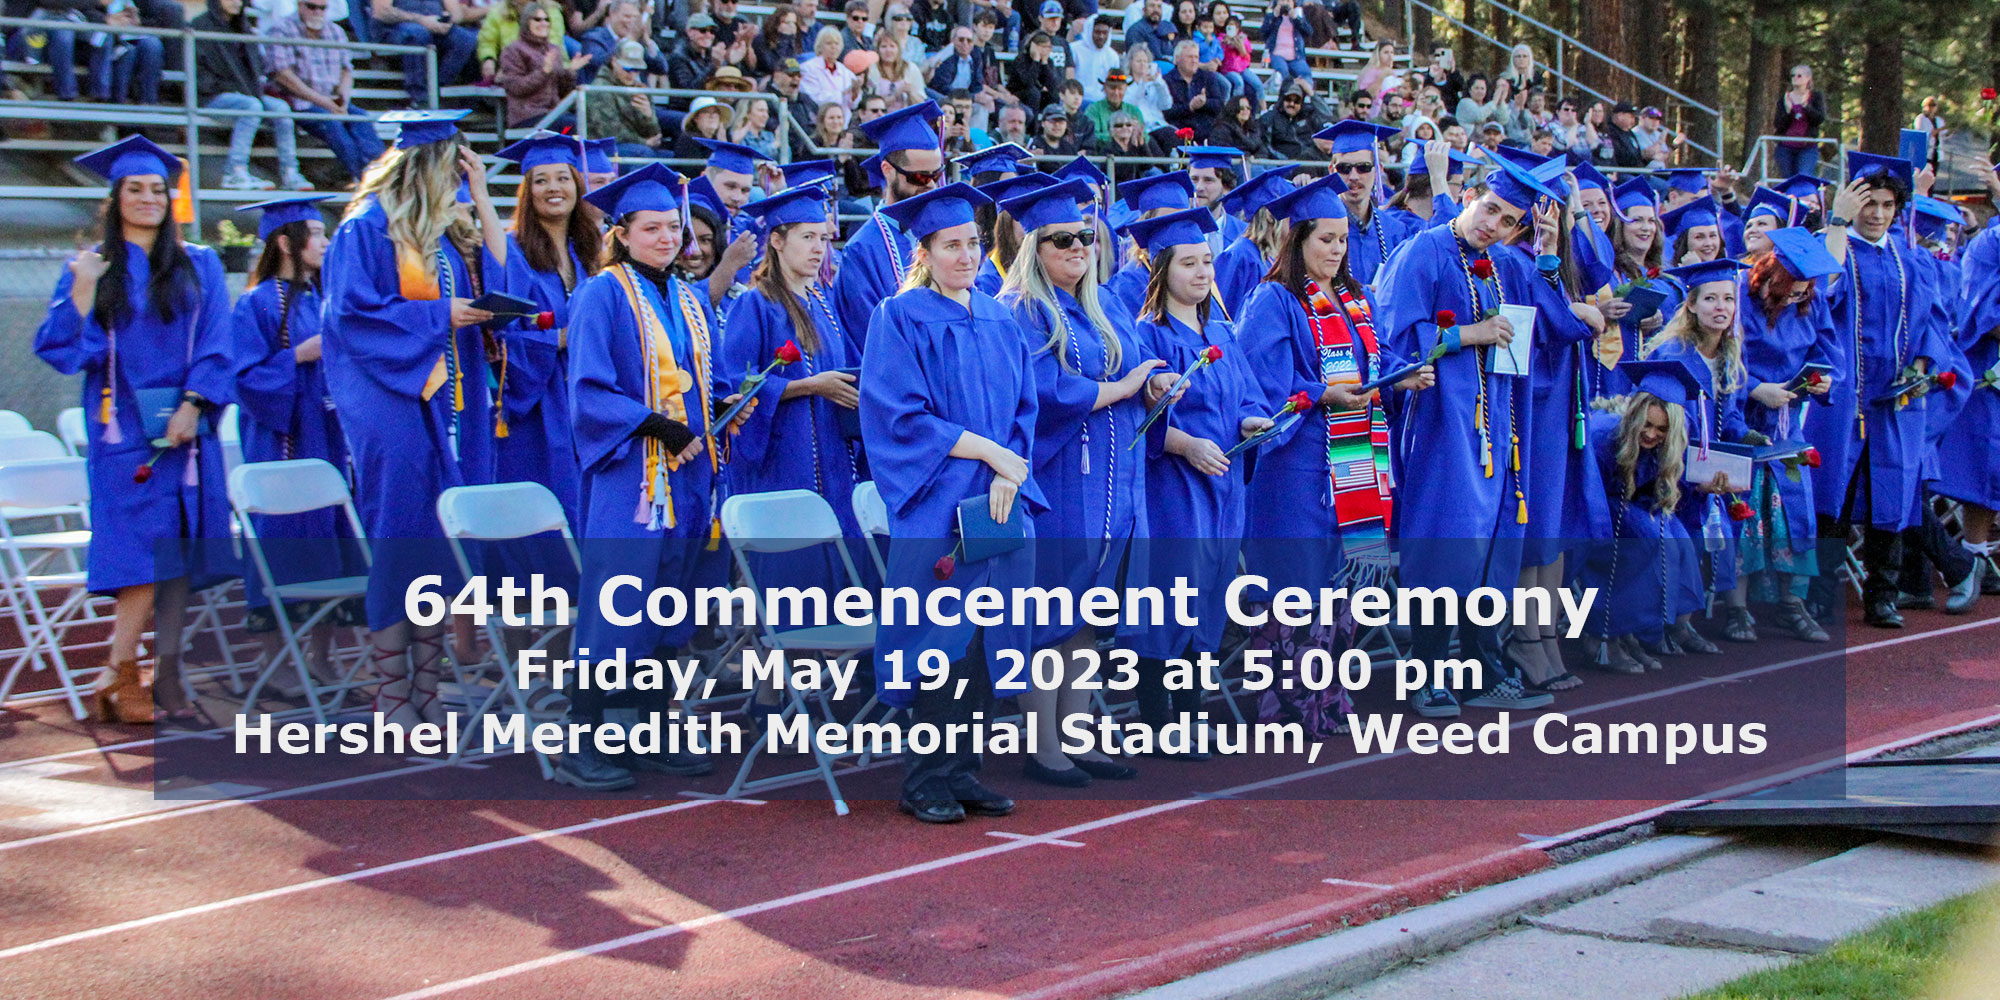 The Petition to Graduate is Oopen. Deadline to Submit Extended to April 14. Commencement is scheduled for Friday, May 19, 2023.